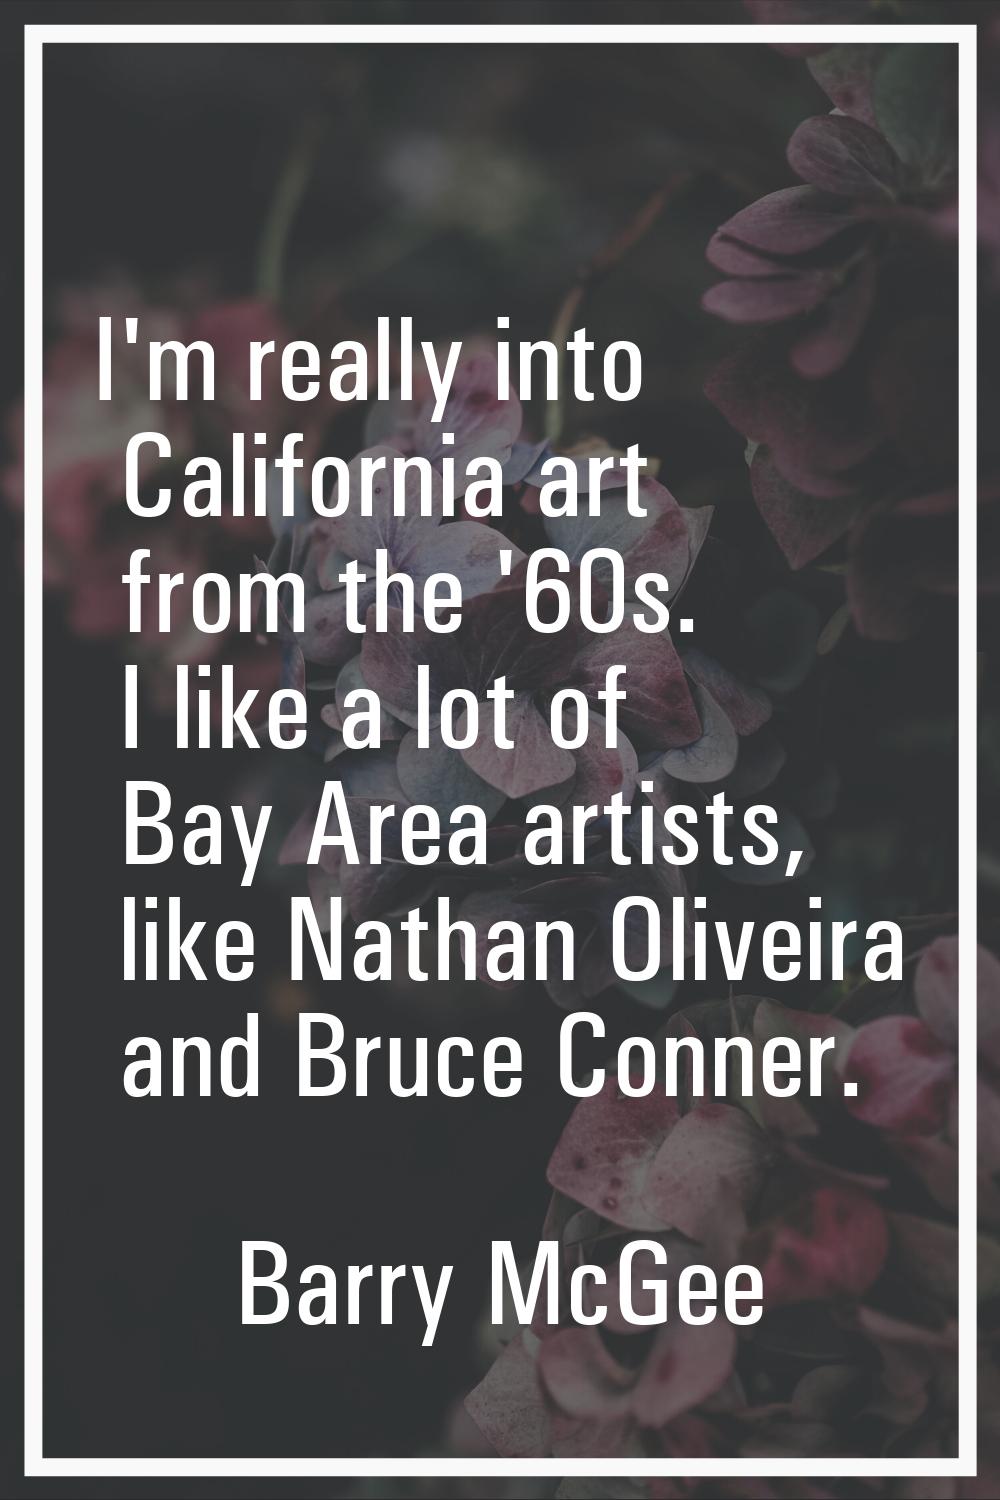 I'm really into California art from the '60s. I like a lot of Bay Area artists, like Nathan Oliveir